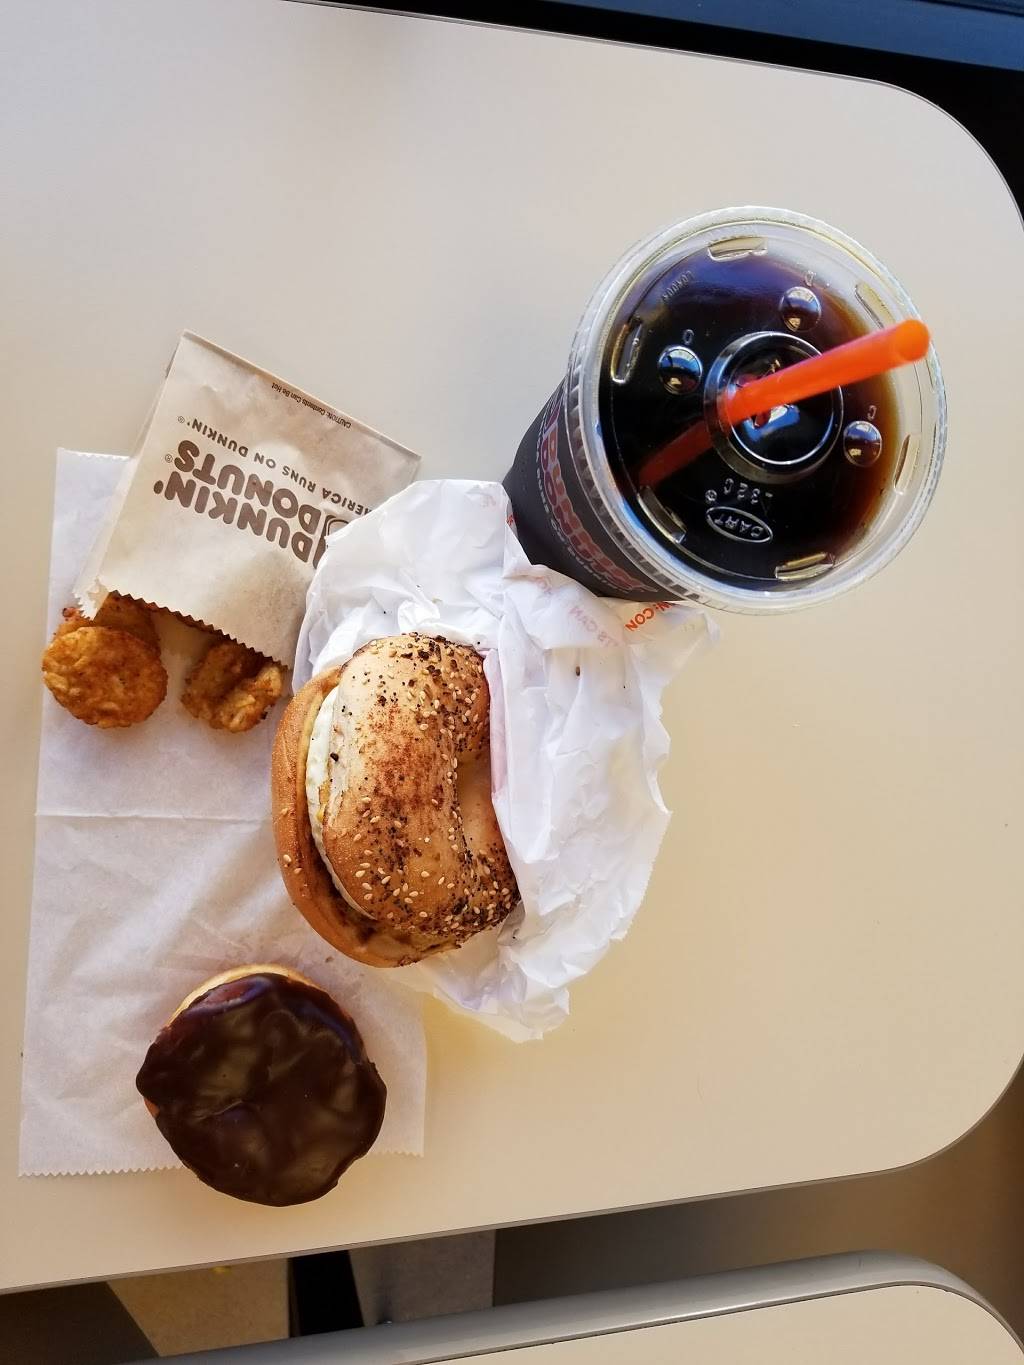 Dunkin Donuts | cafe | 318 Central Ave, Jersey City, NJ 07307, USA | 2017929595 OR +1 201-792-9595